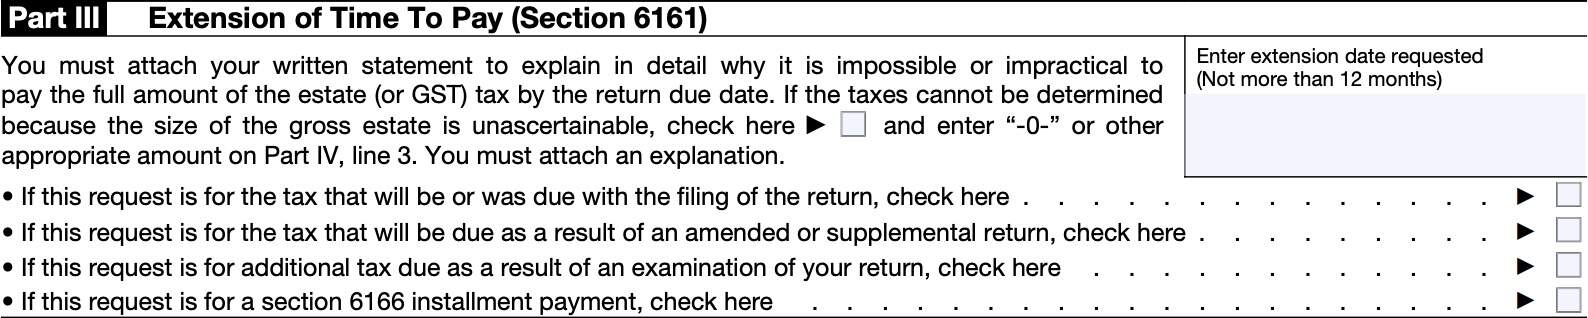 irs form 4768, part III, extension of time to pay (section 6161)